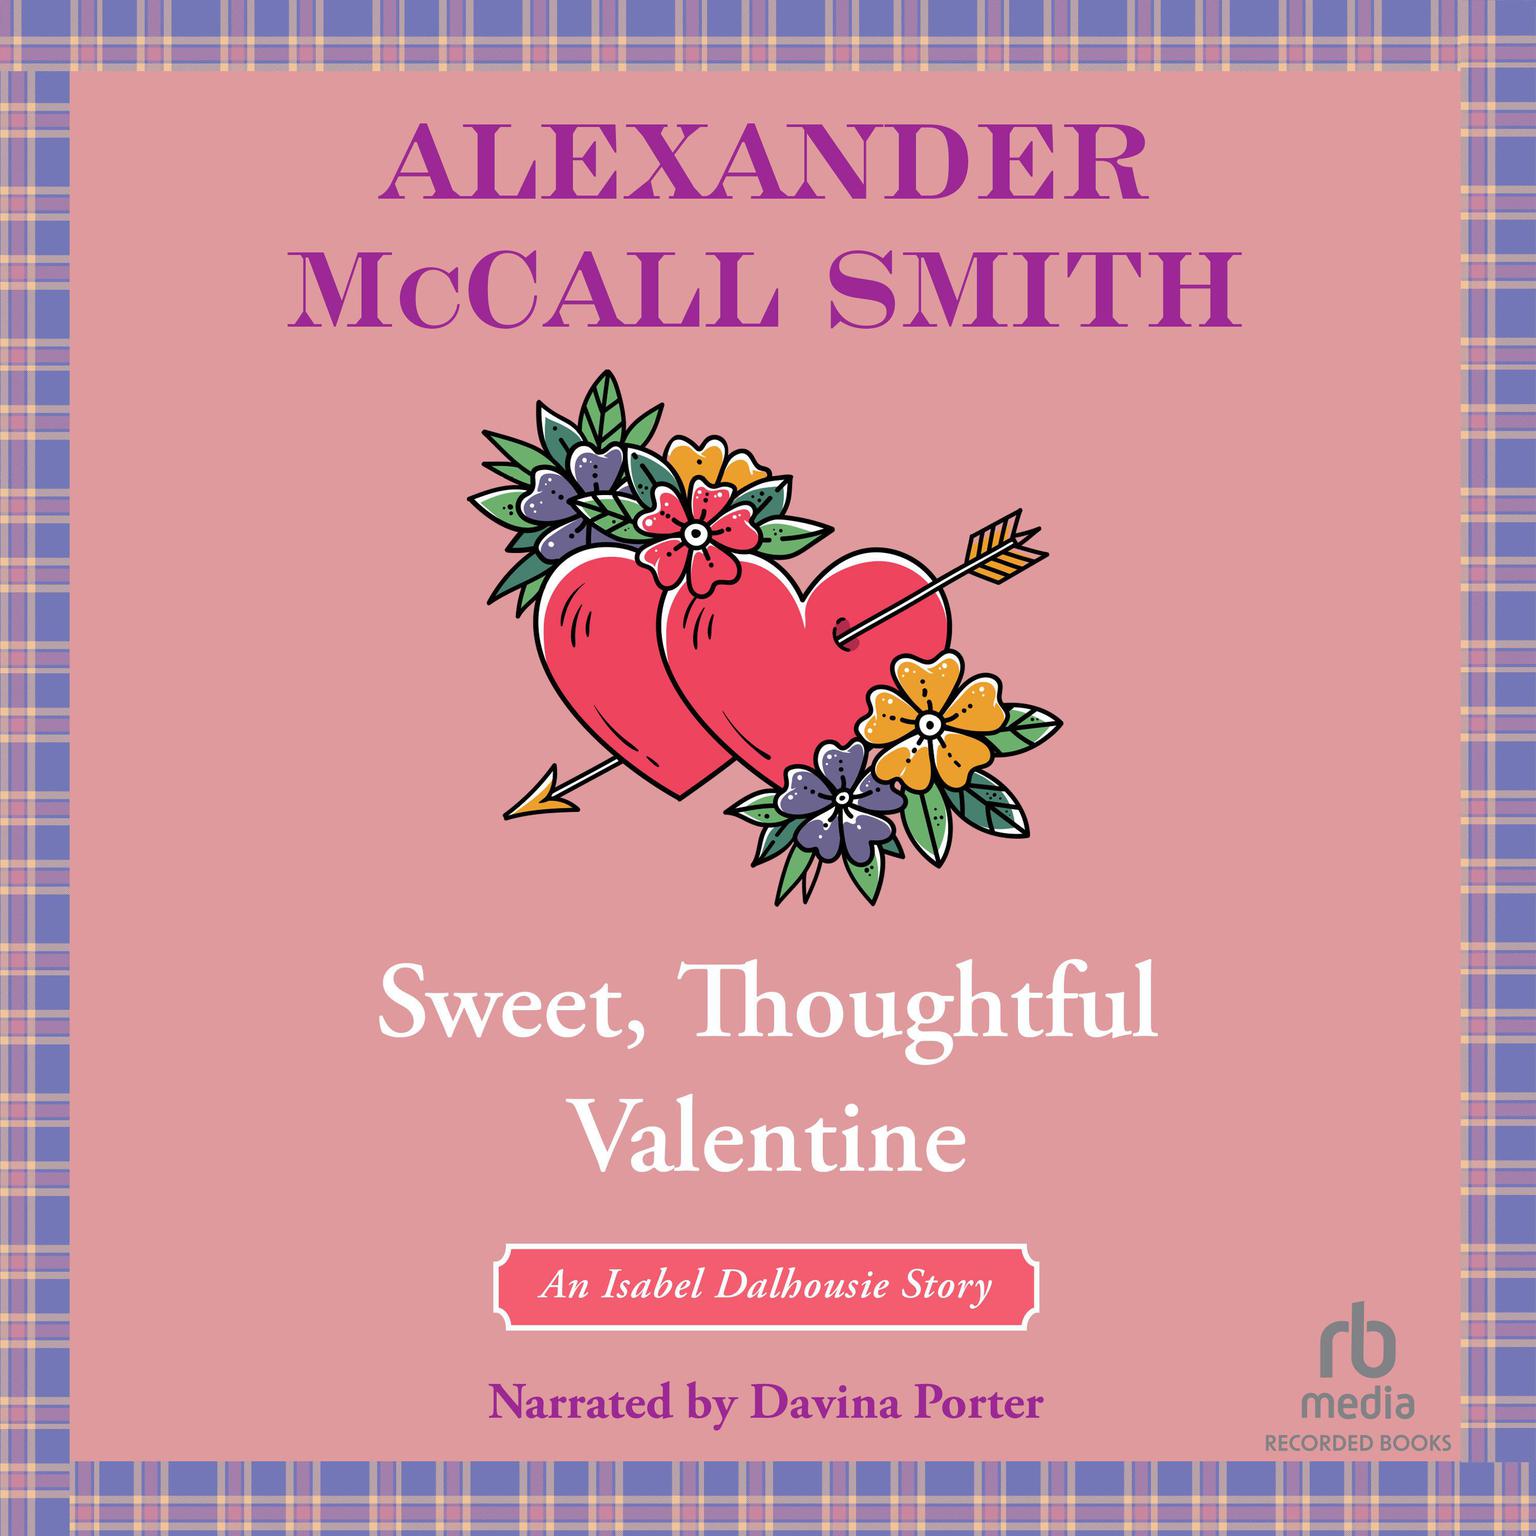 Sweet, Thoughtful Valentine Audiobook, by Alexander McCall Smith